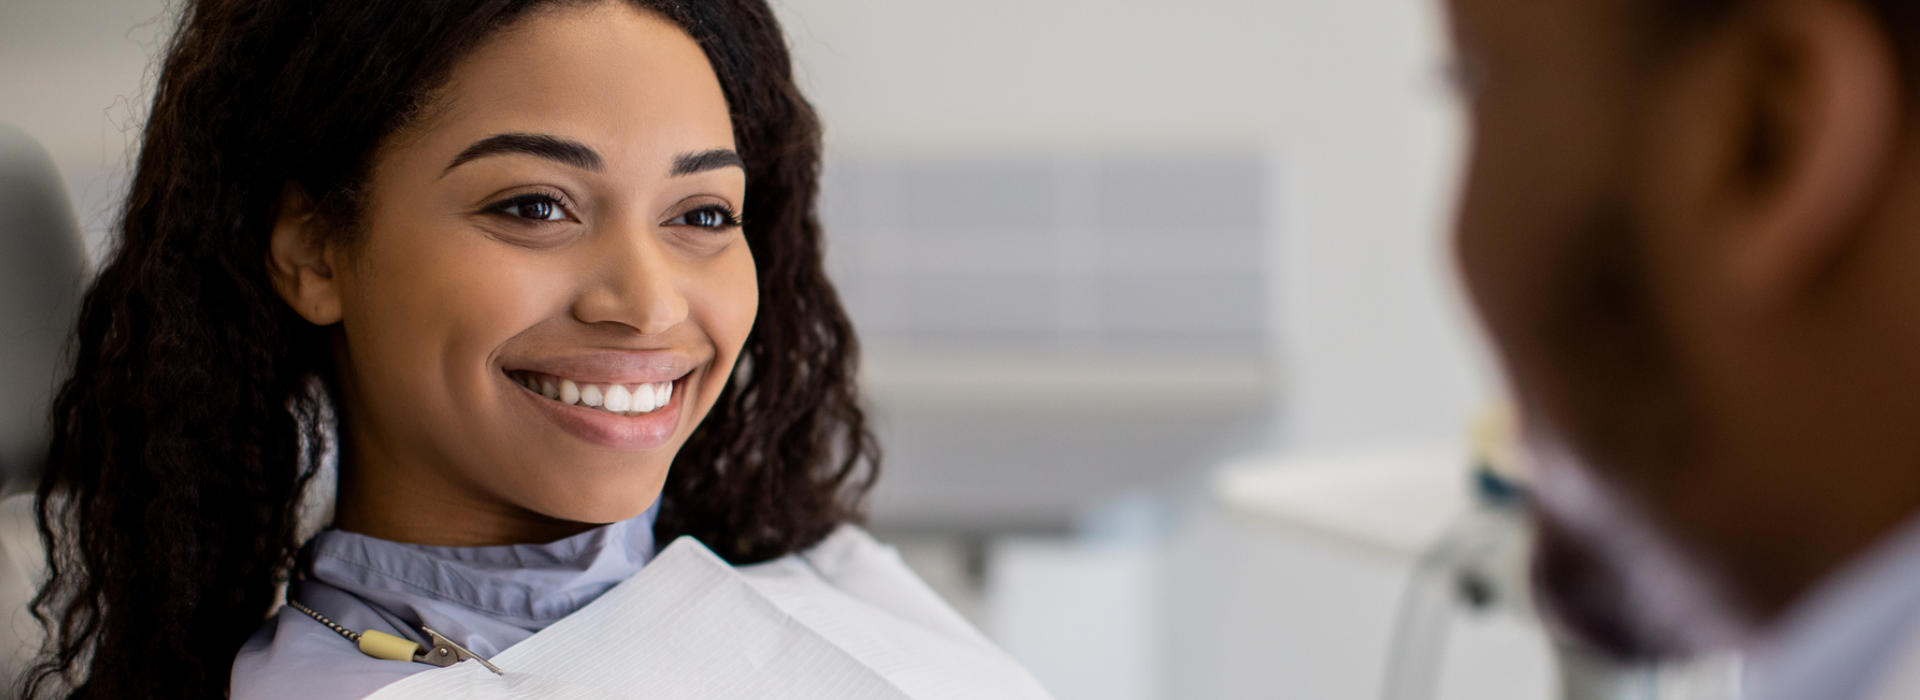 A woman is smiling after cosmetic dentistry.